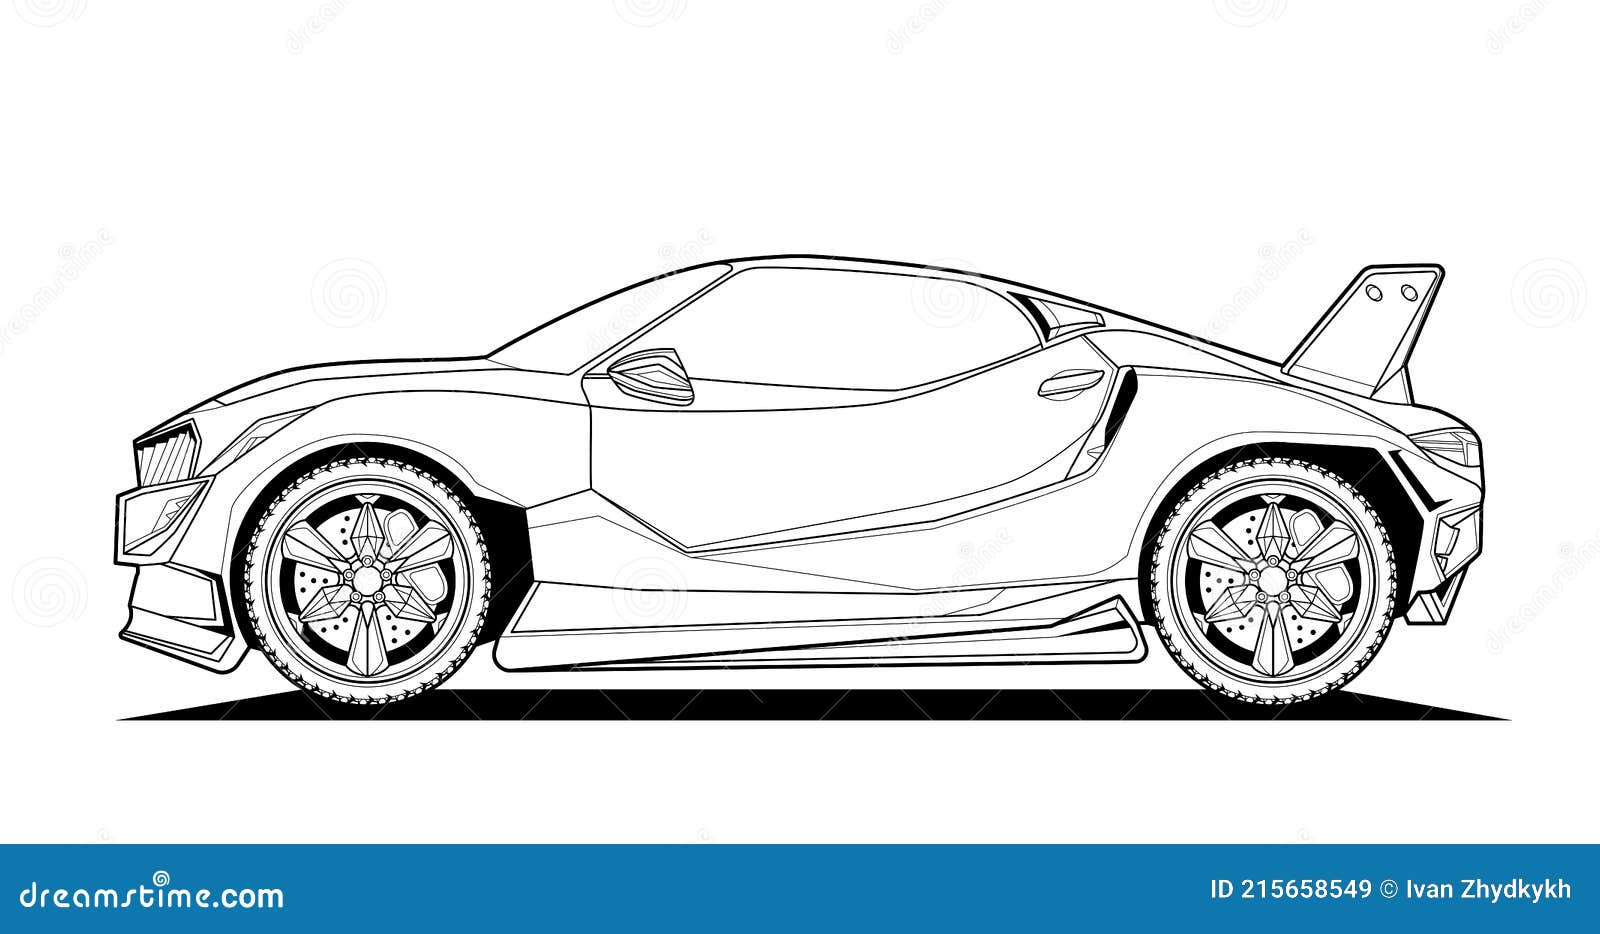 Car sketch. Vector illustration in black and white. Coloring paper